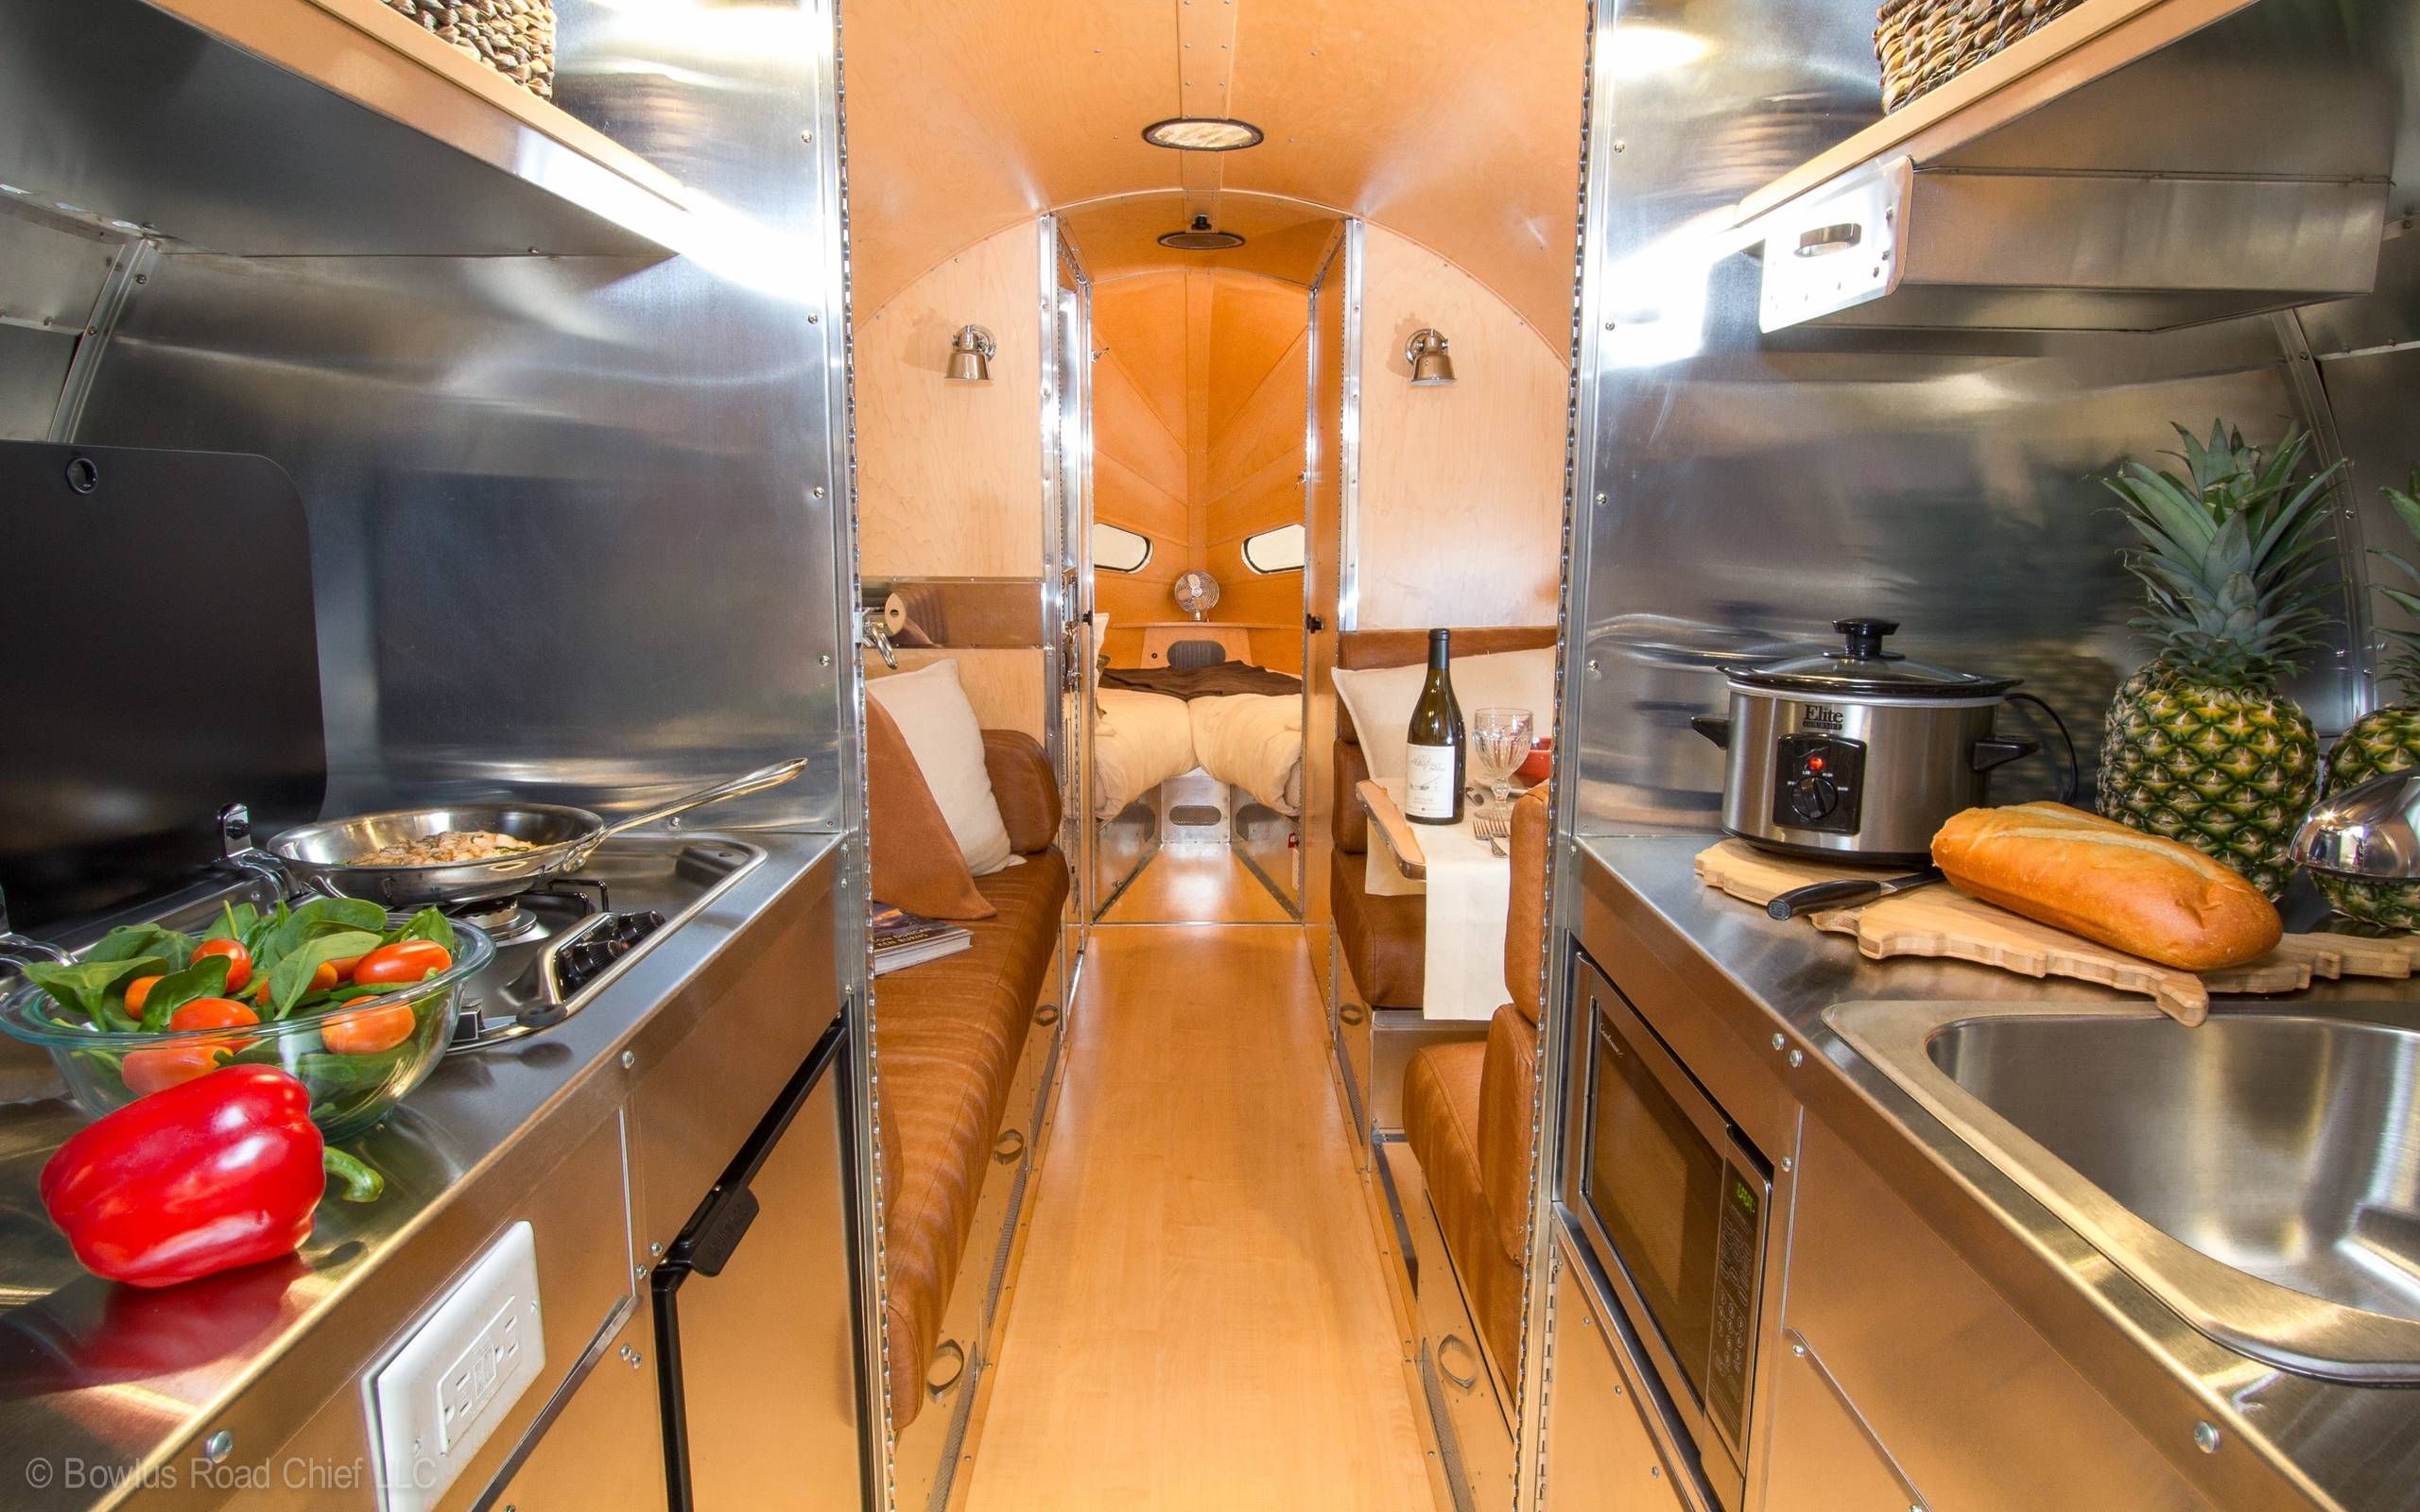 The Bowlus Road Chief may be the ultimate travel trailer